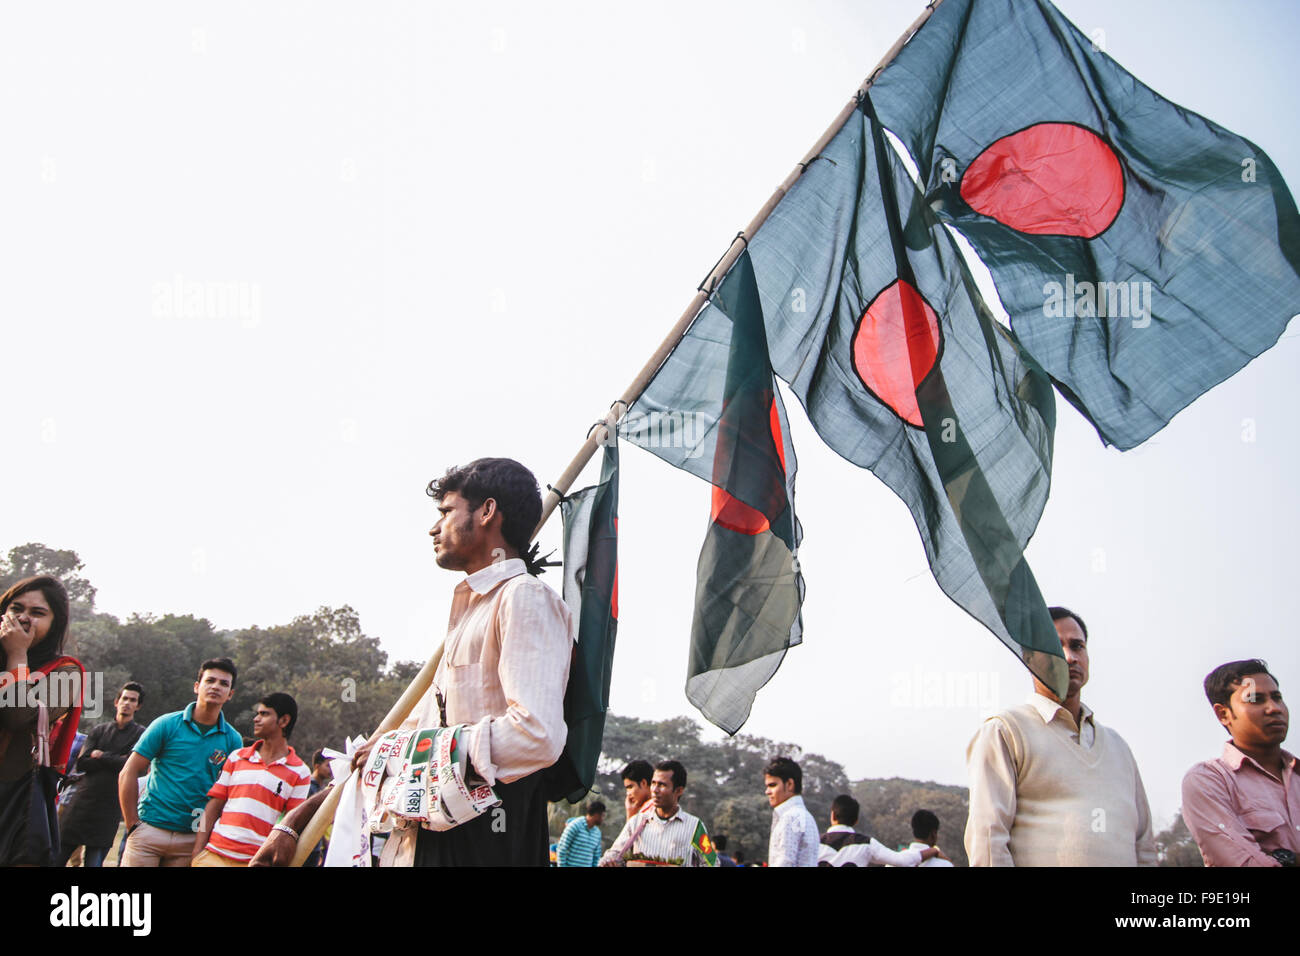 Dhaka Bangladesh 16th Dec 2015 A Flag Vendor Selling Bangladesh S National Flag Bangladeshi People Observing Victory Day On 16 December 1971 Bangladesh Gained Victory After 9 Month Long Liberation War Against Pakistan